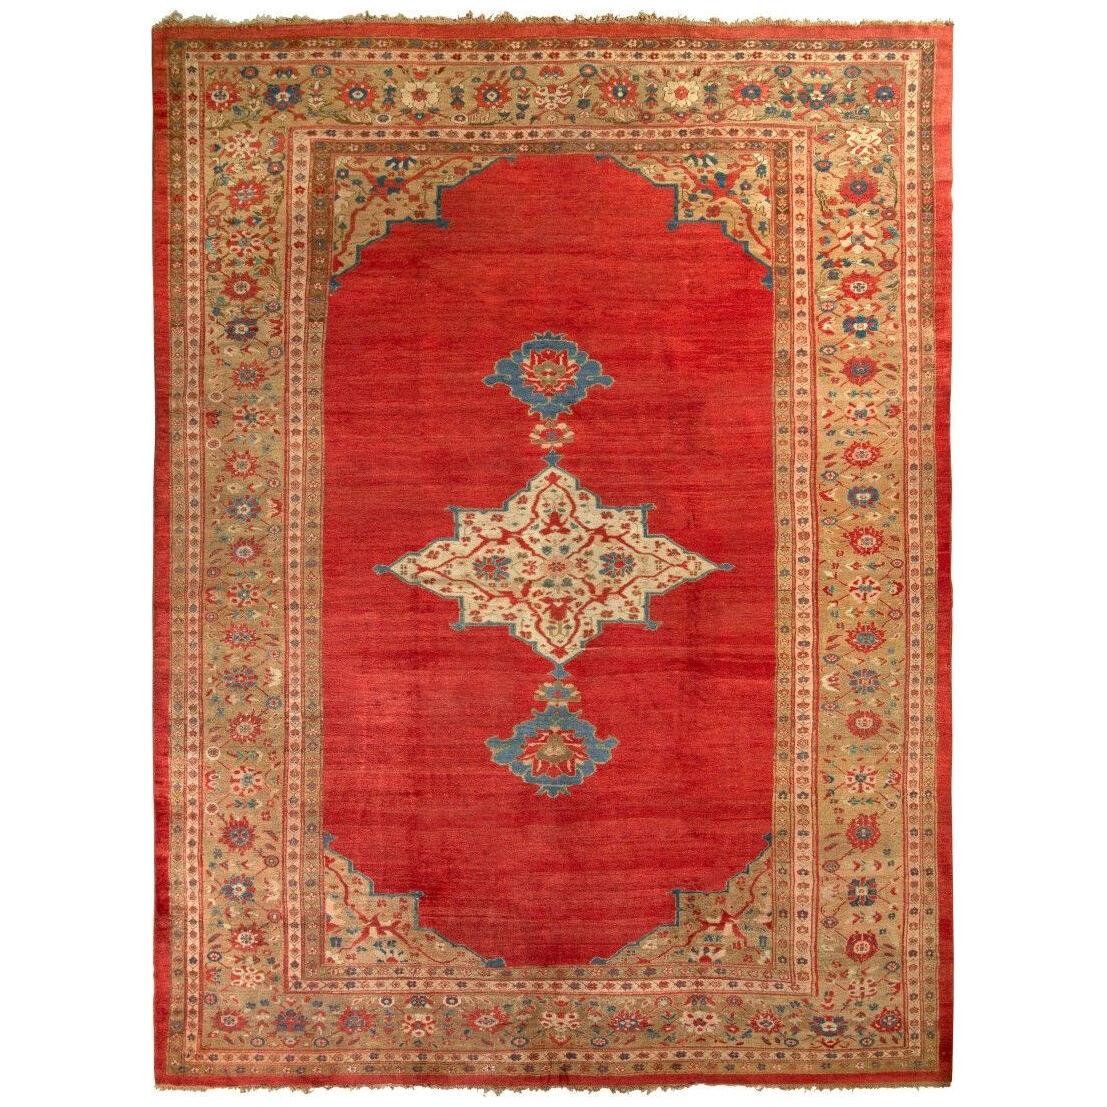 Antique Sultanabad Persian Rug in Red and Beige Brown Medallion Pattern